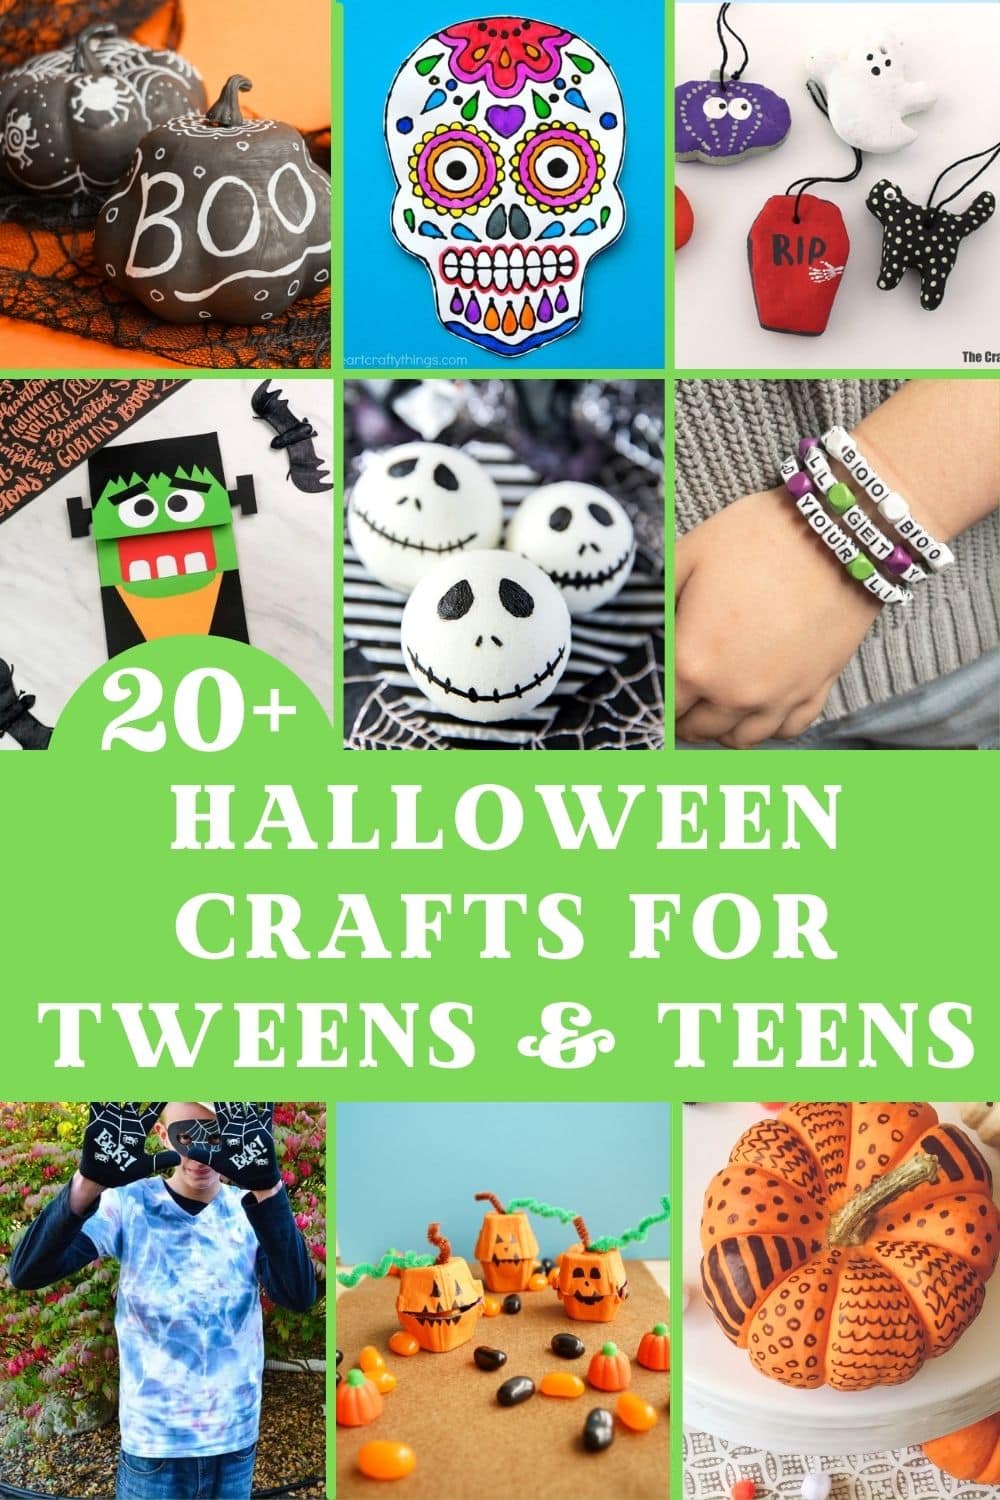 The Coolest Halloween Crafts for Tweens to Make